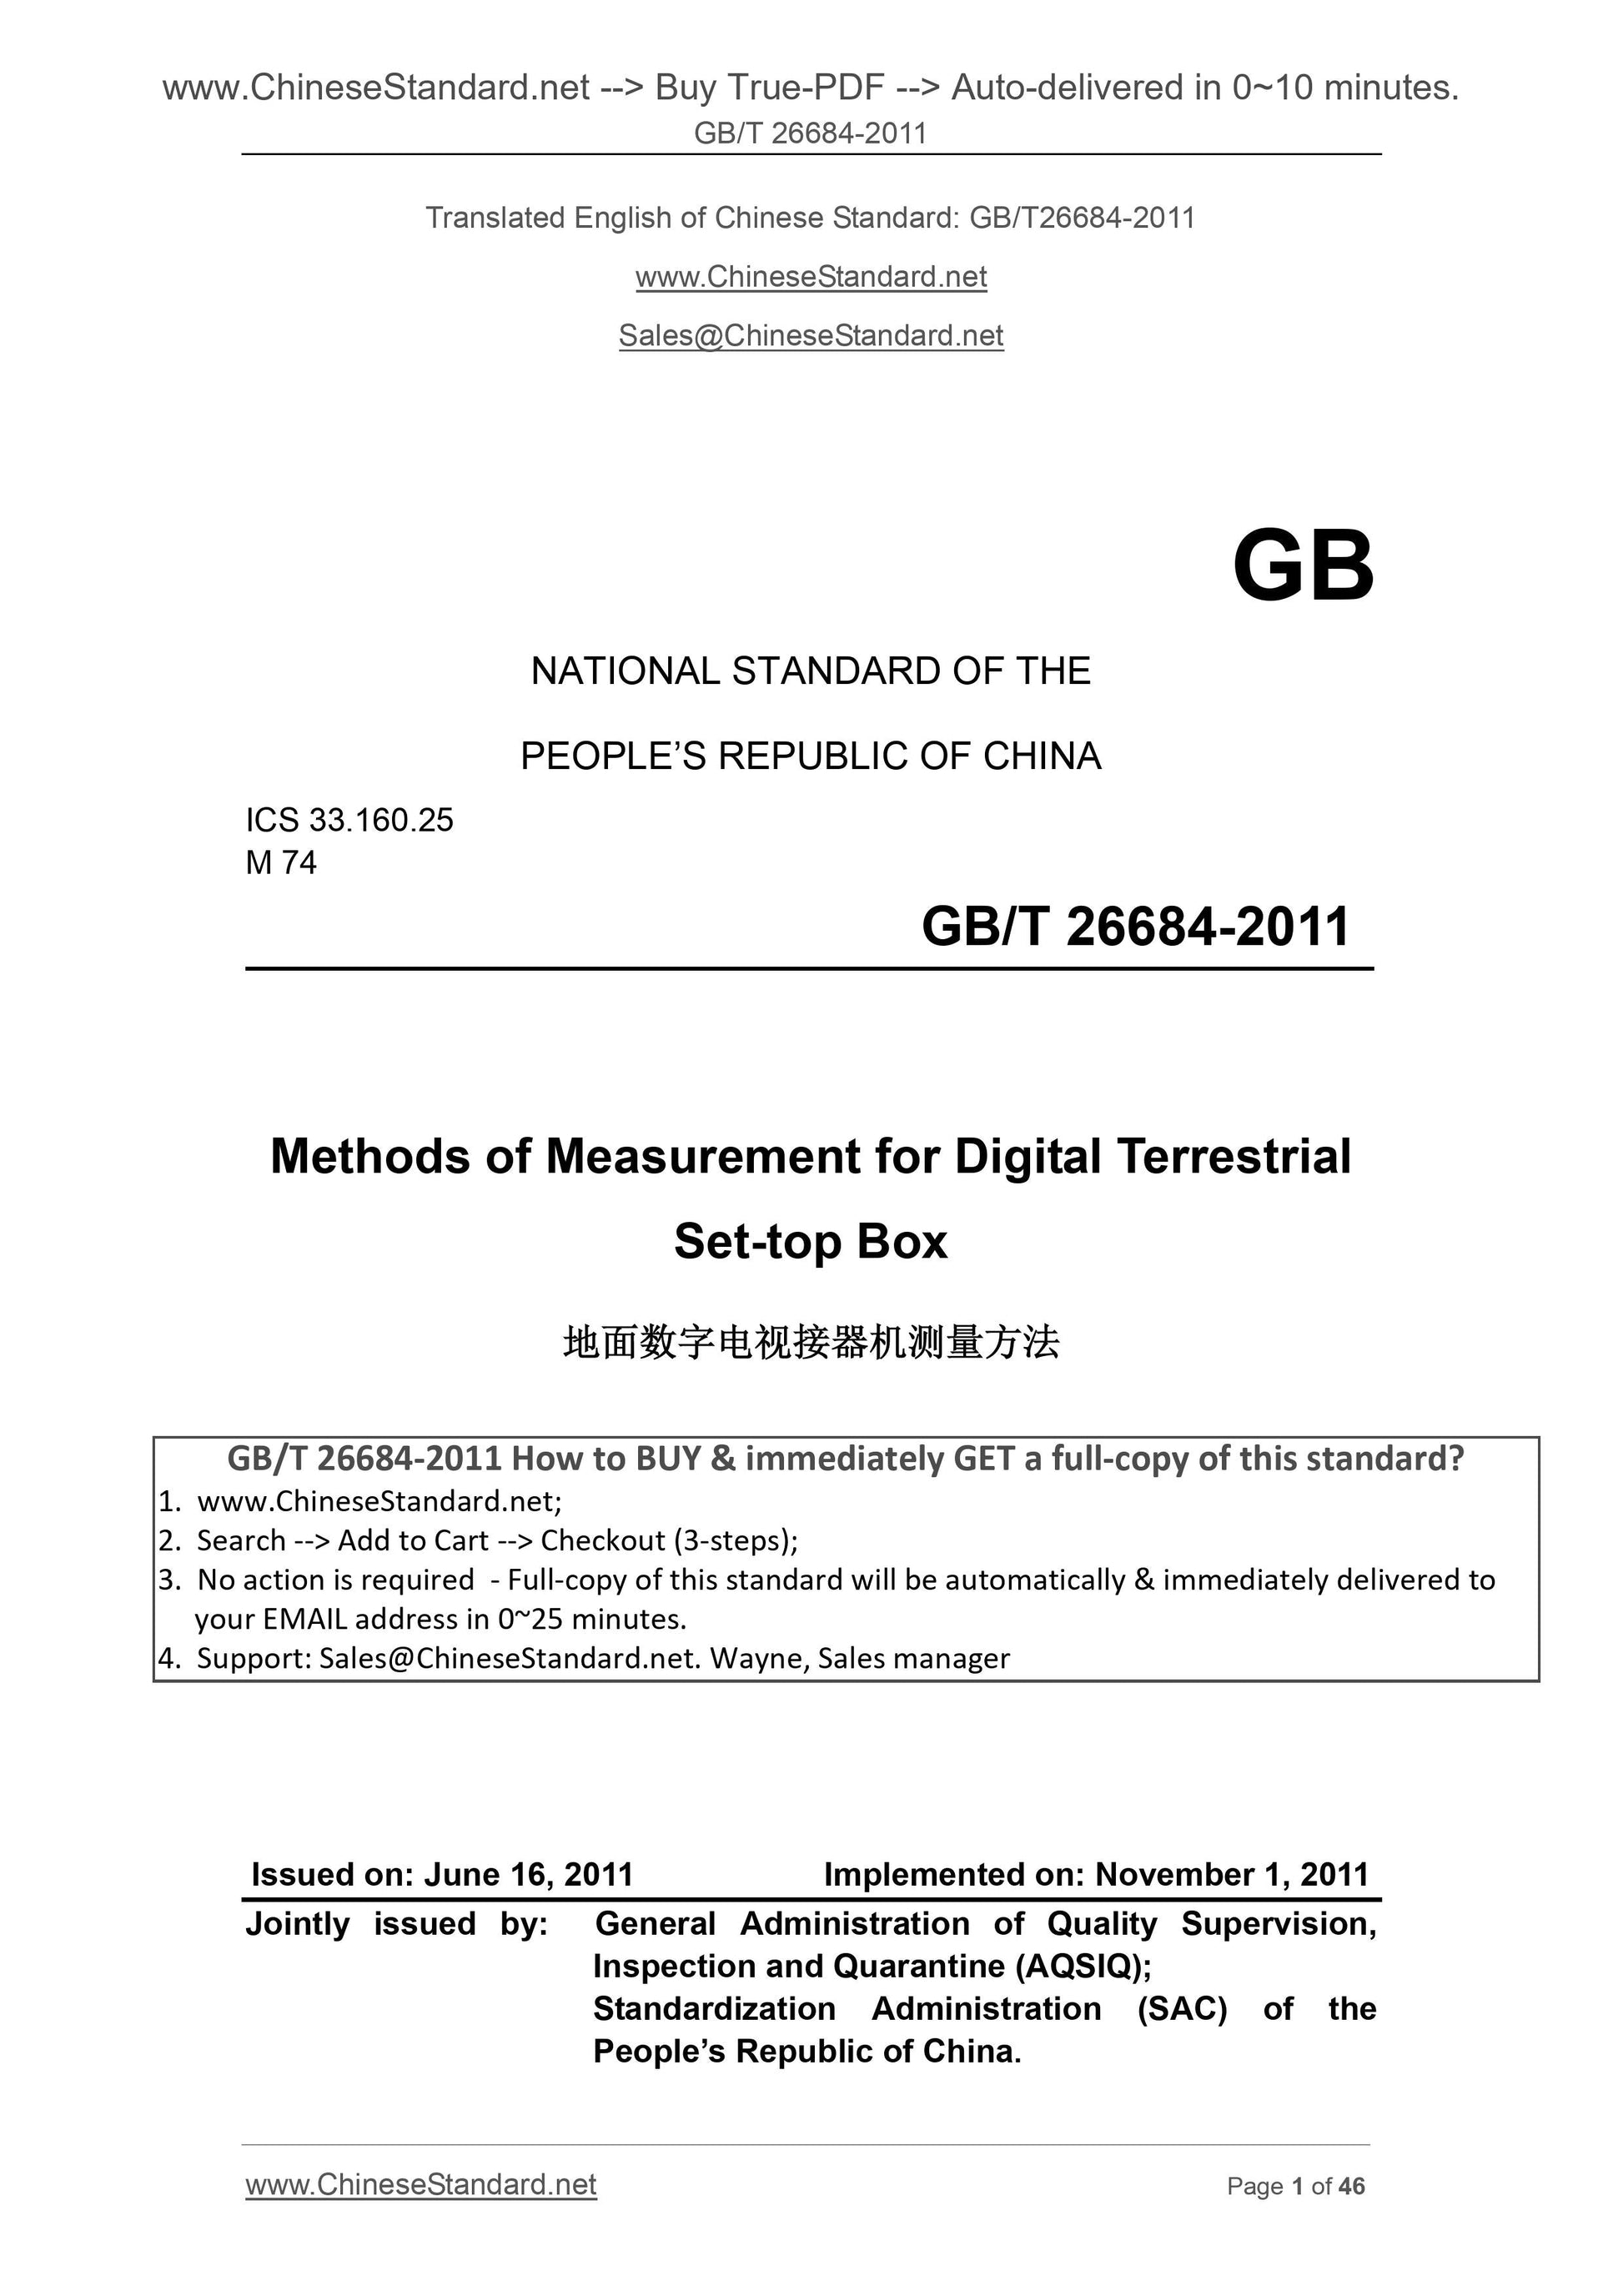 GB/T 26684-2011 Page 1